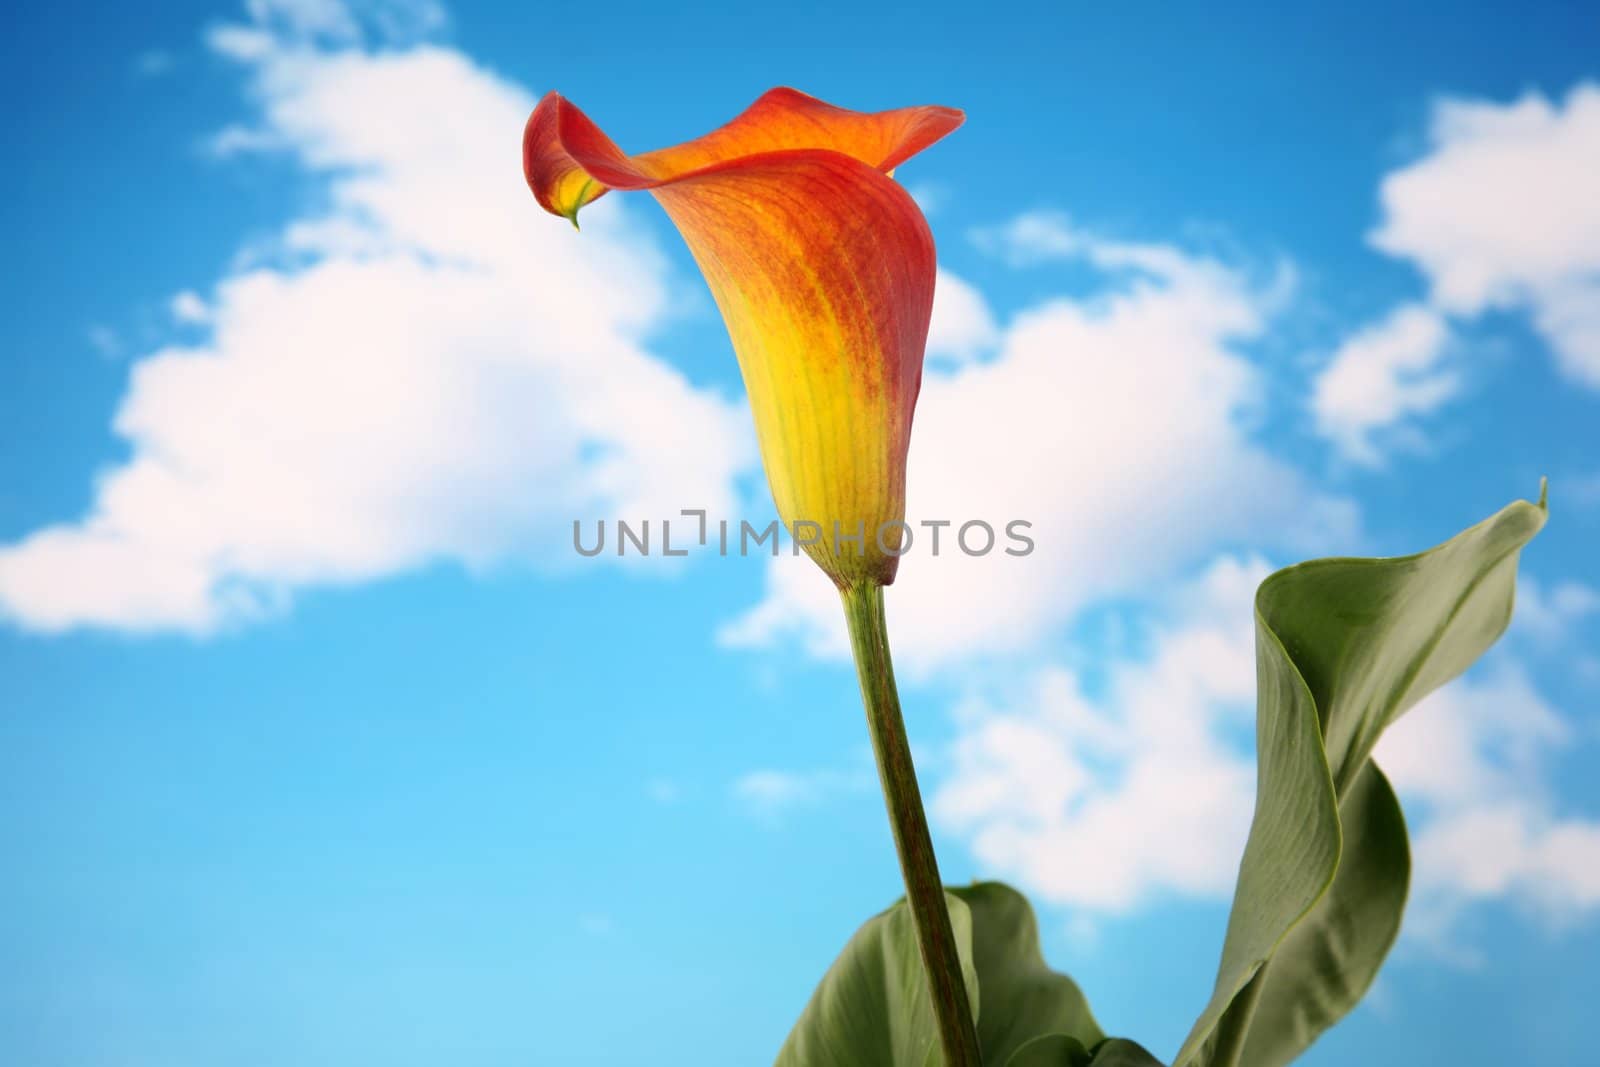 Calla lilly 2 by scrappinstacy